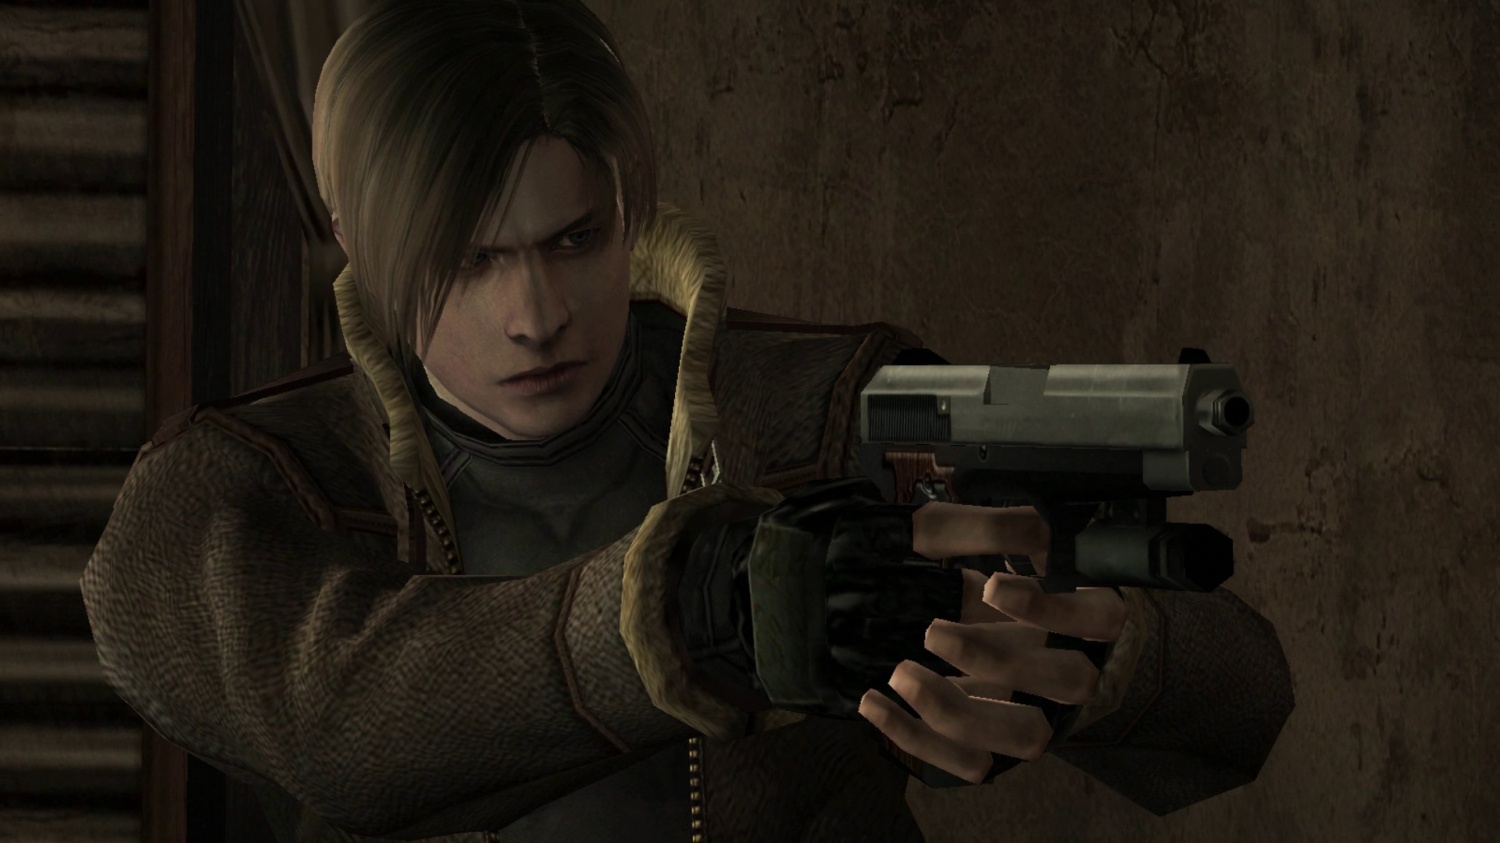 Resident Evil 4 Remake Rumored in the Works for 2022 Launch